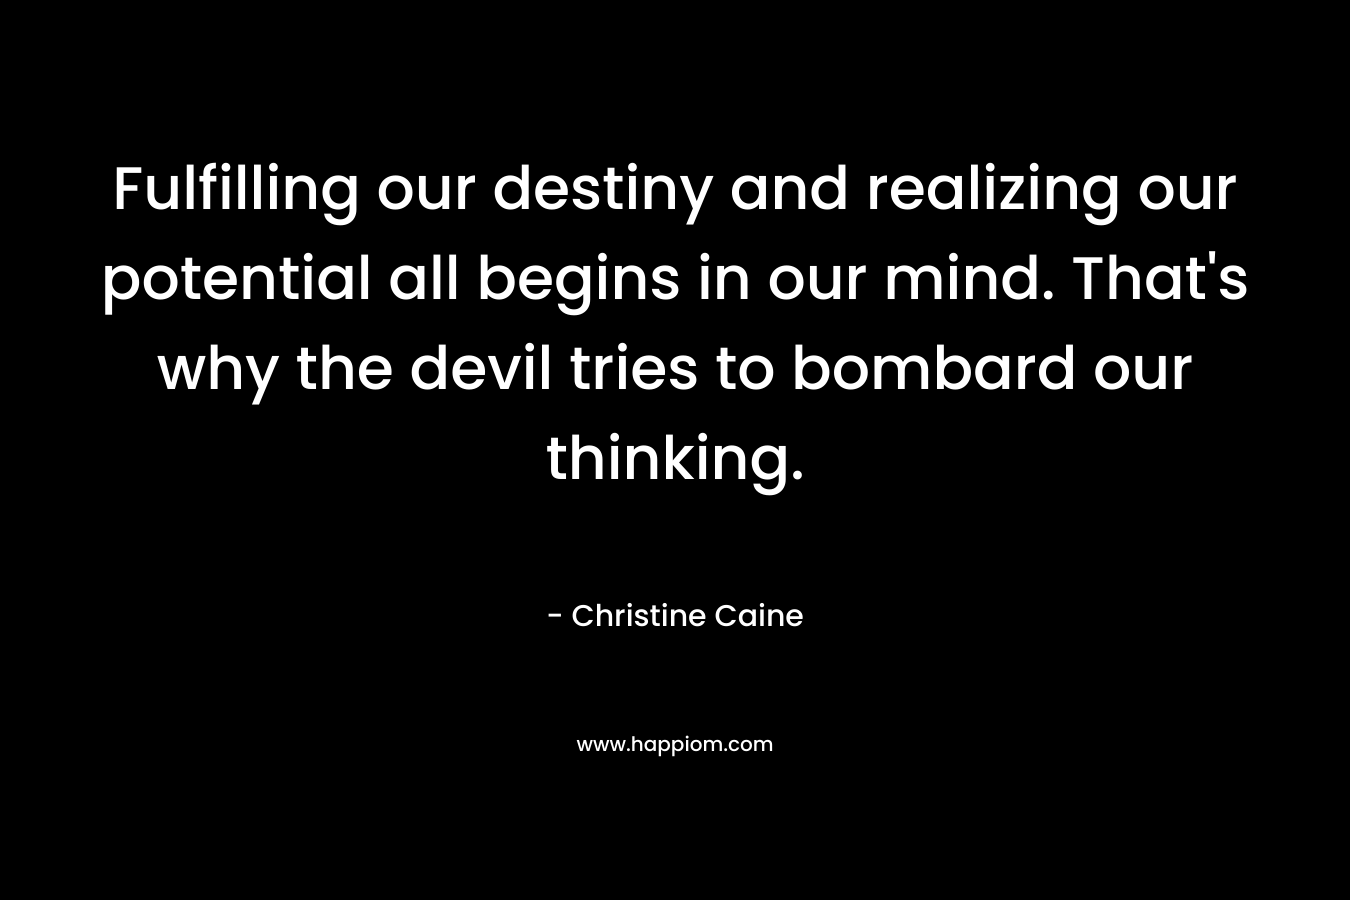 Fulfilling our destiny and realizing our potential all begins in our mind. That's why the devil tries to bombard our thinking.